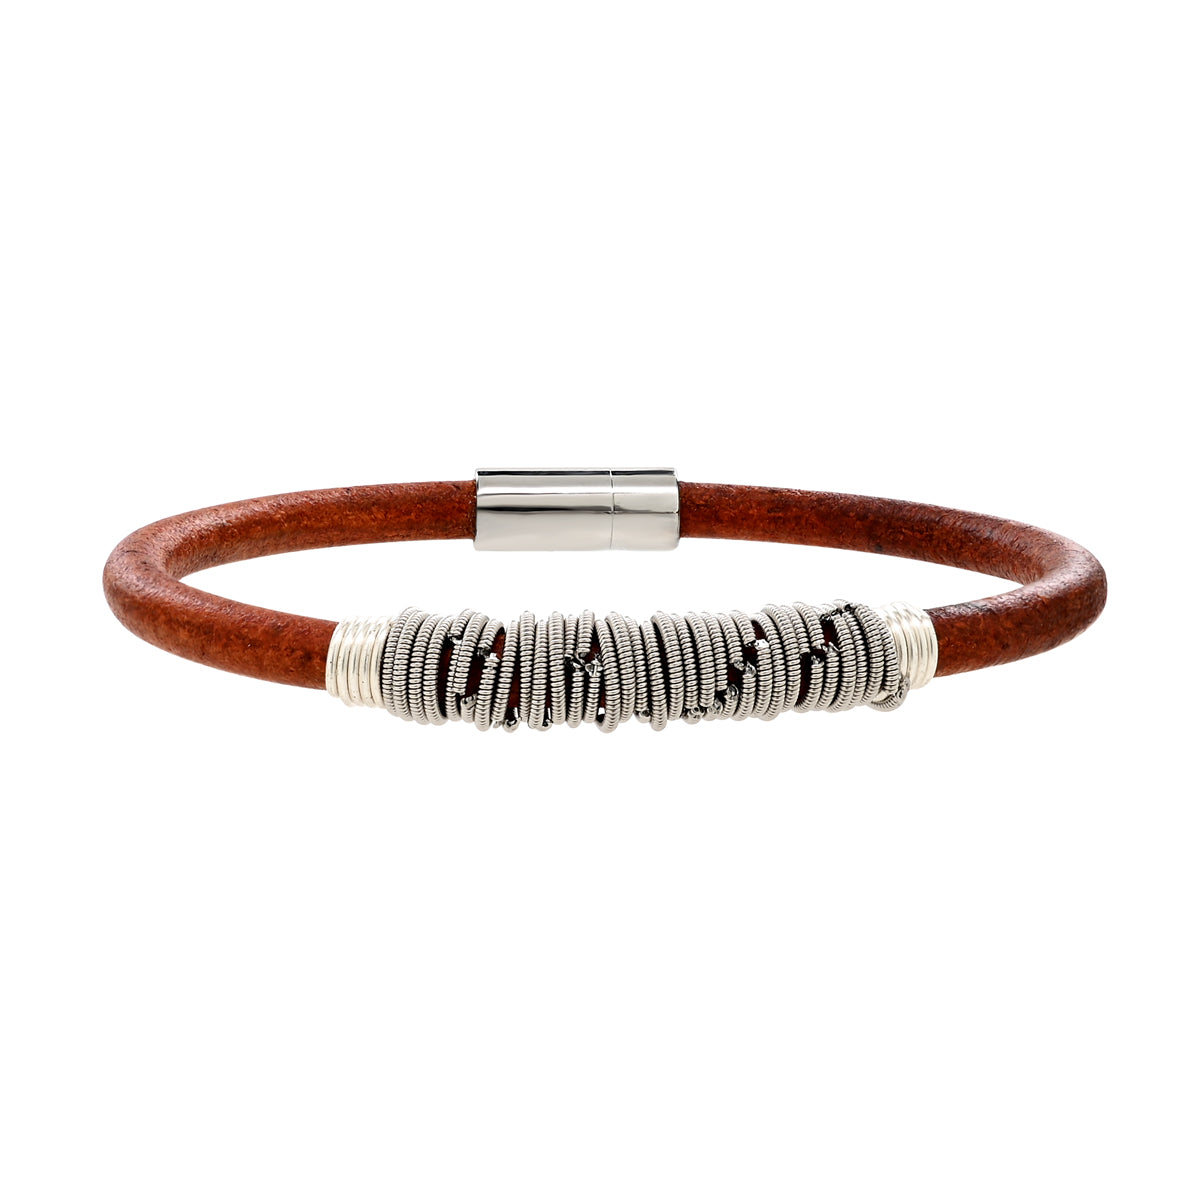 Wound Up Leather Bracelet - Staccato